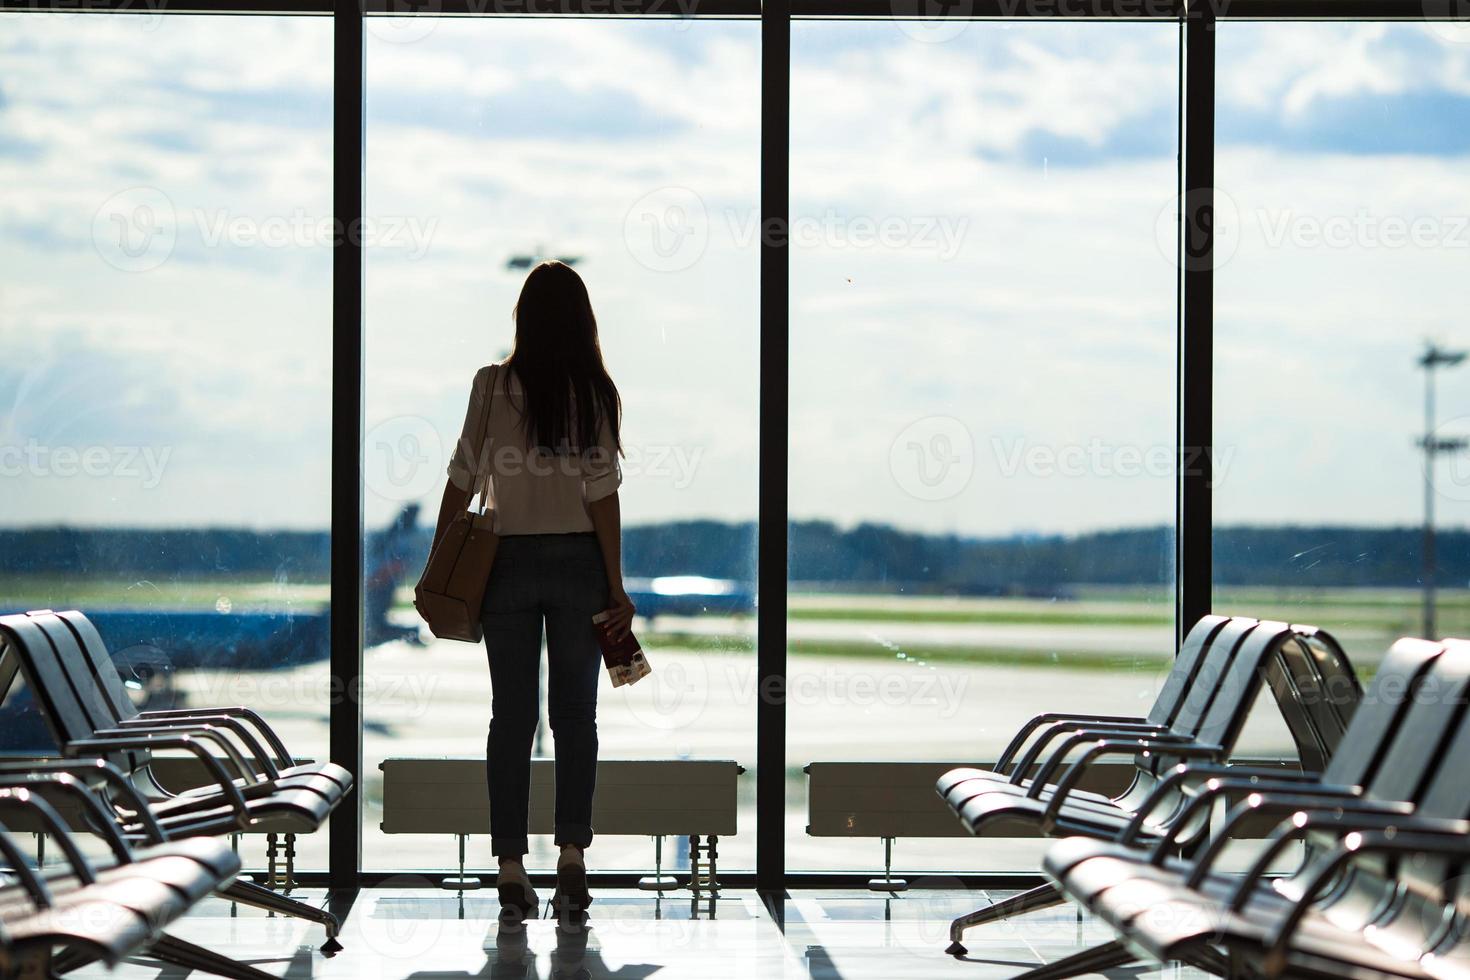 Silhouette of woman in an airport lounge waiting for flight aircraft photo